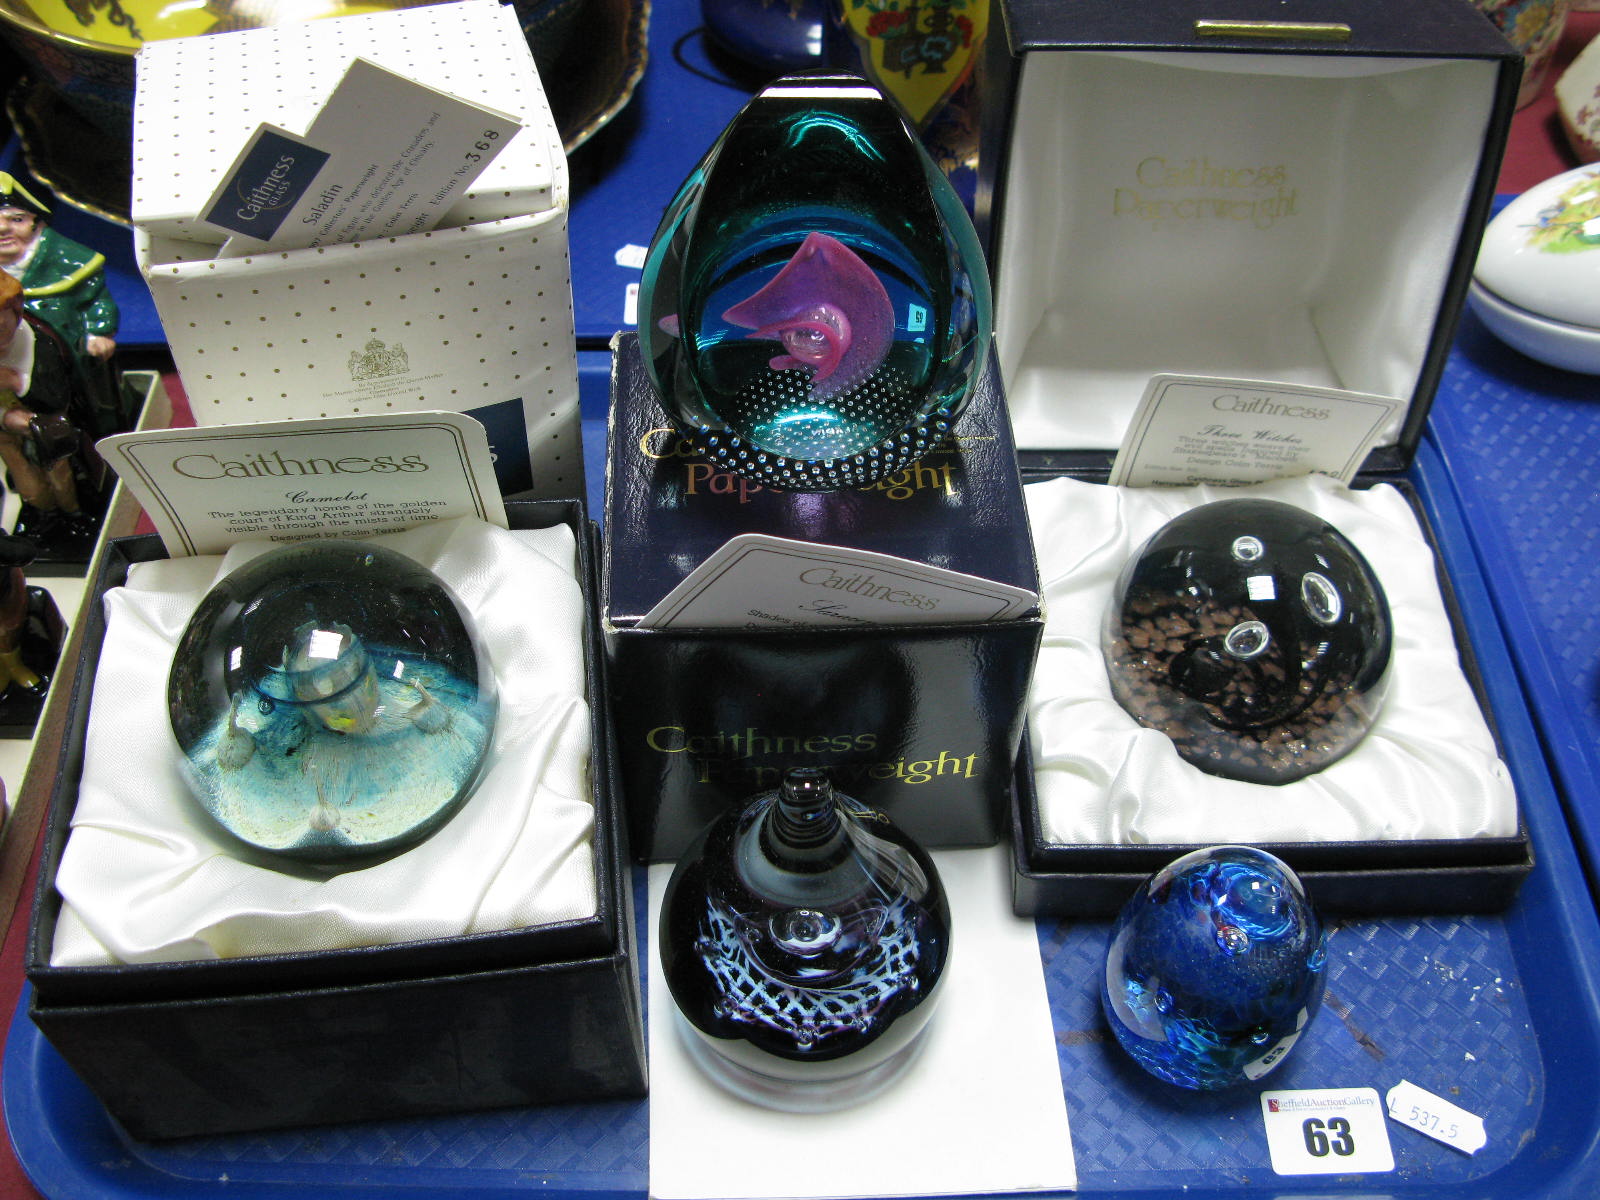 Caithness Paperweights: Camelot, limited edition No. 315/750; Three Witches (Inspired by Macbeth)